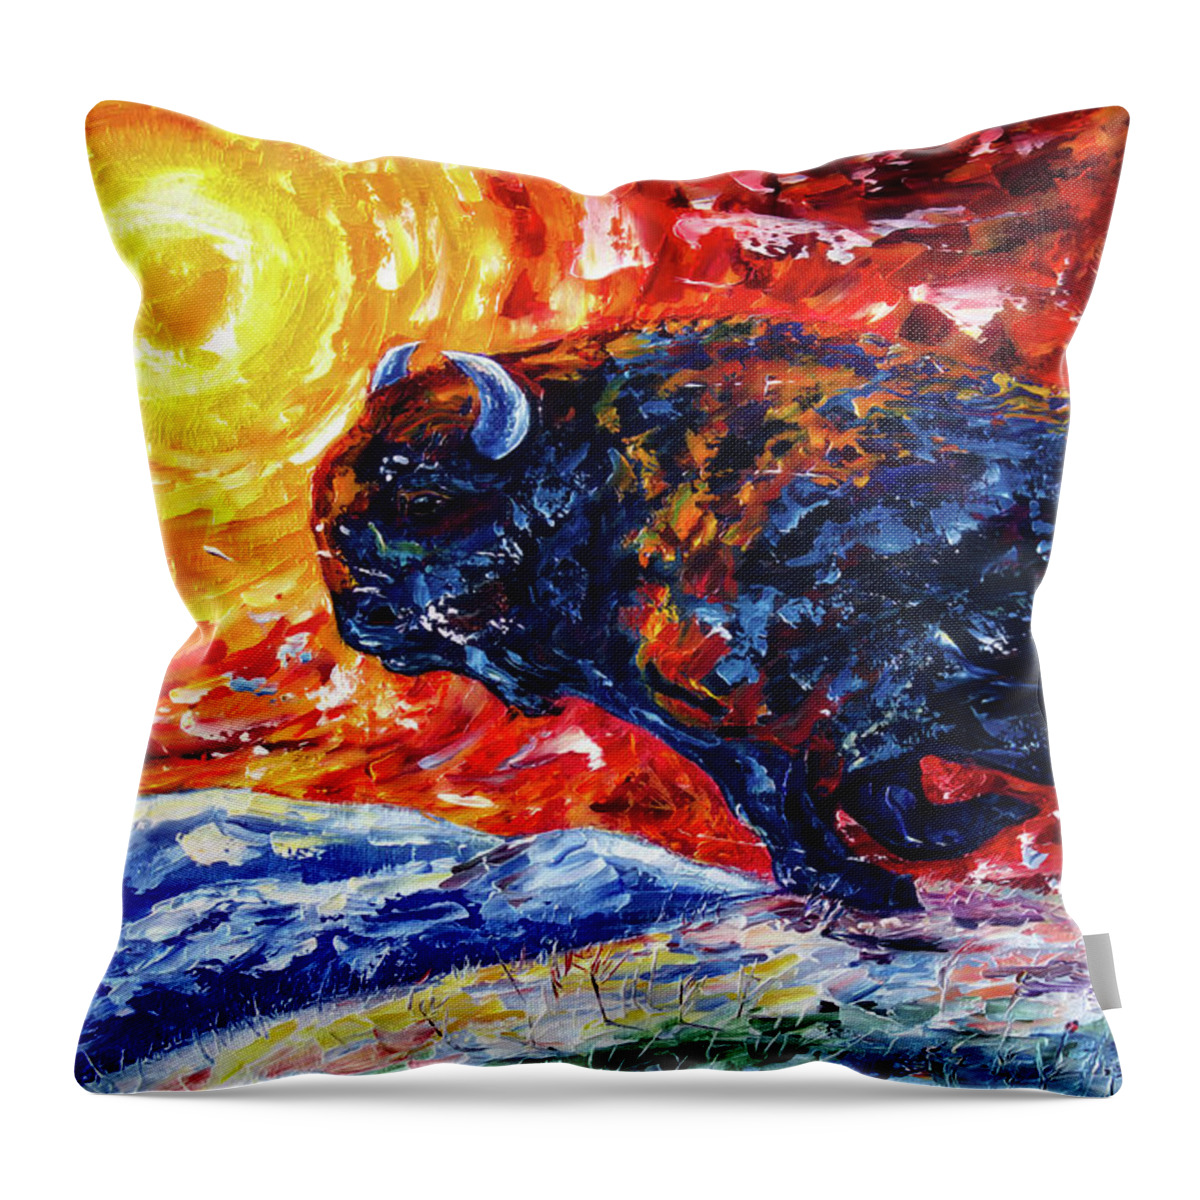 Olena Art Throw Pillow featuring the painting Wild the Storm - American Bison Running by Lena Owens - OLena Art Vibrant Palette Knife and Graphic Design